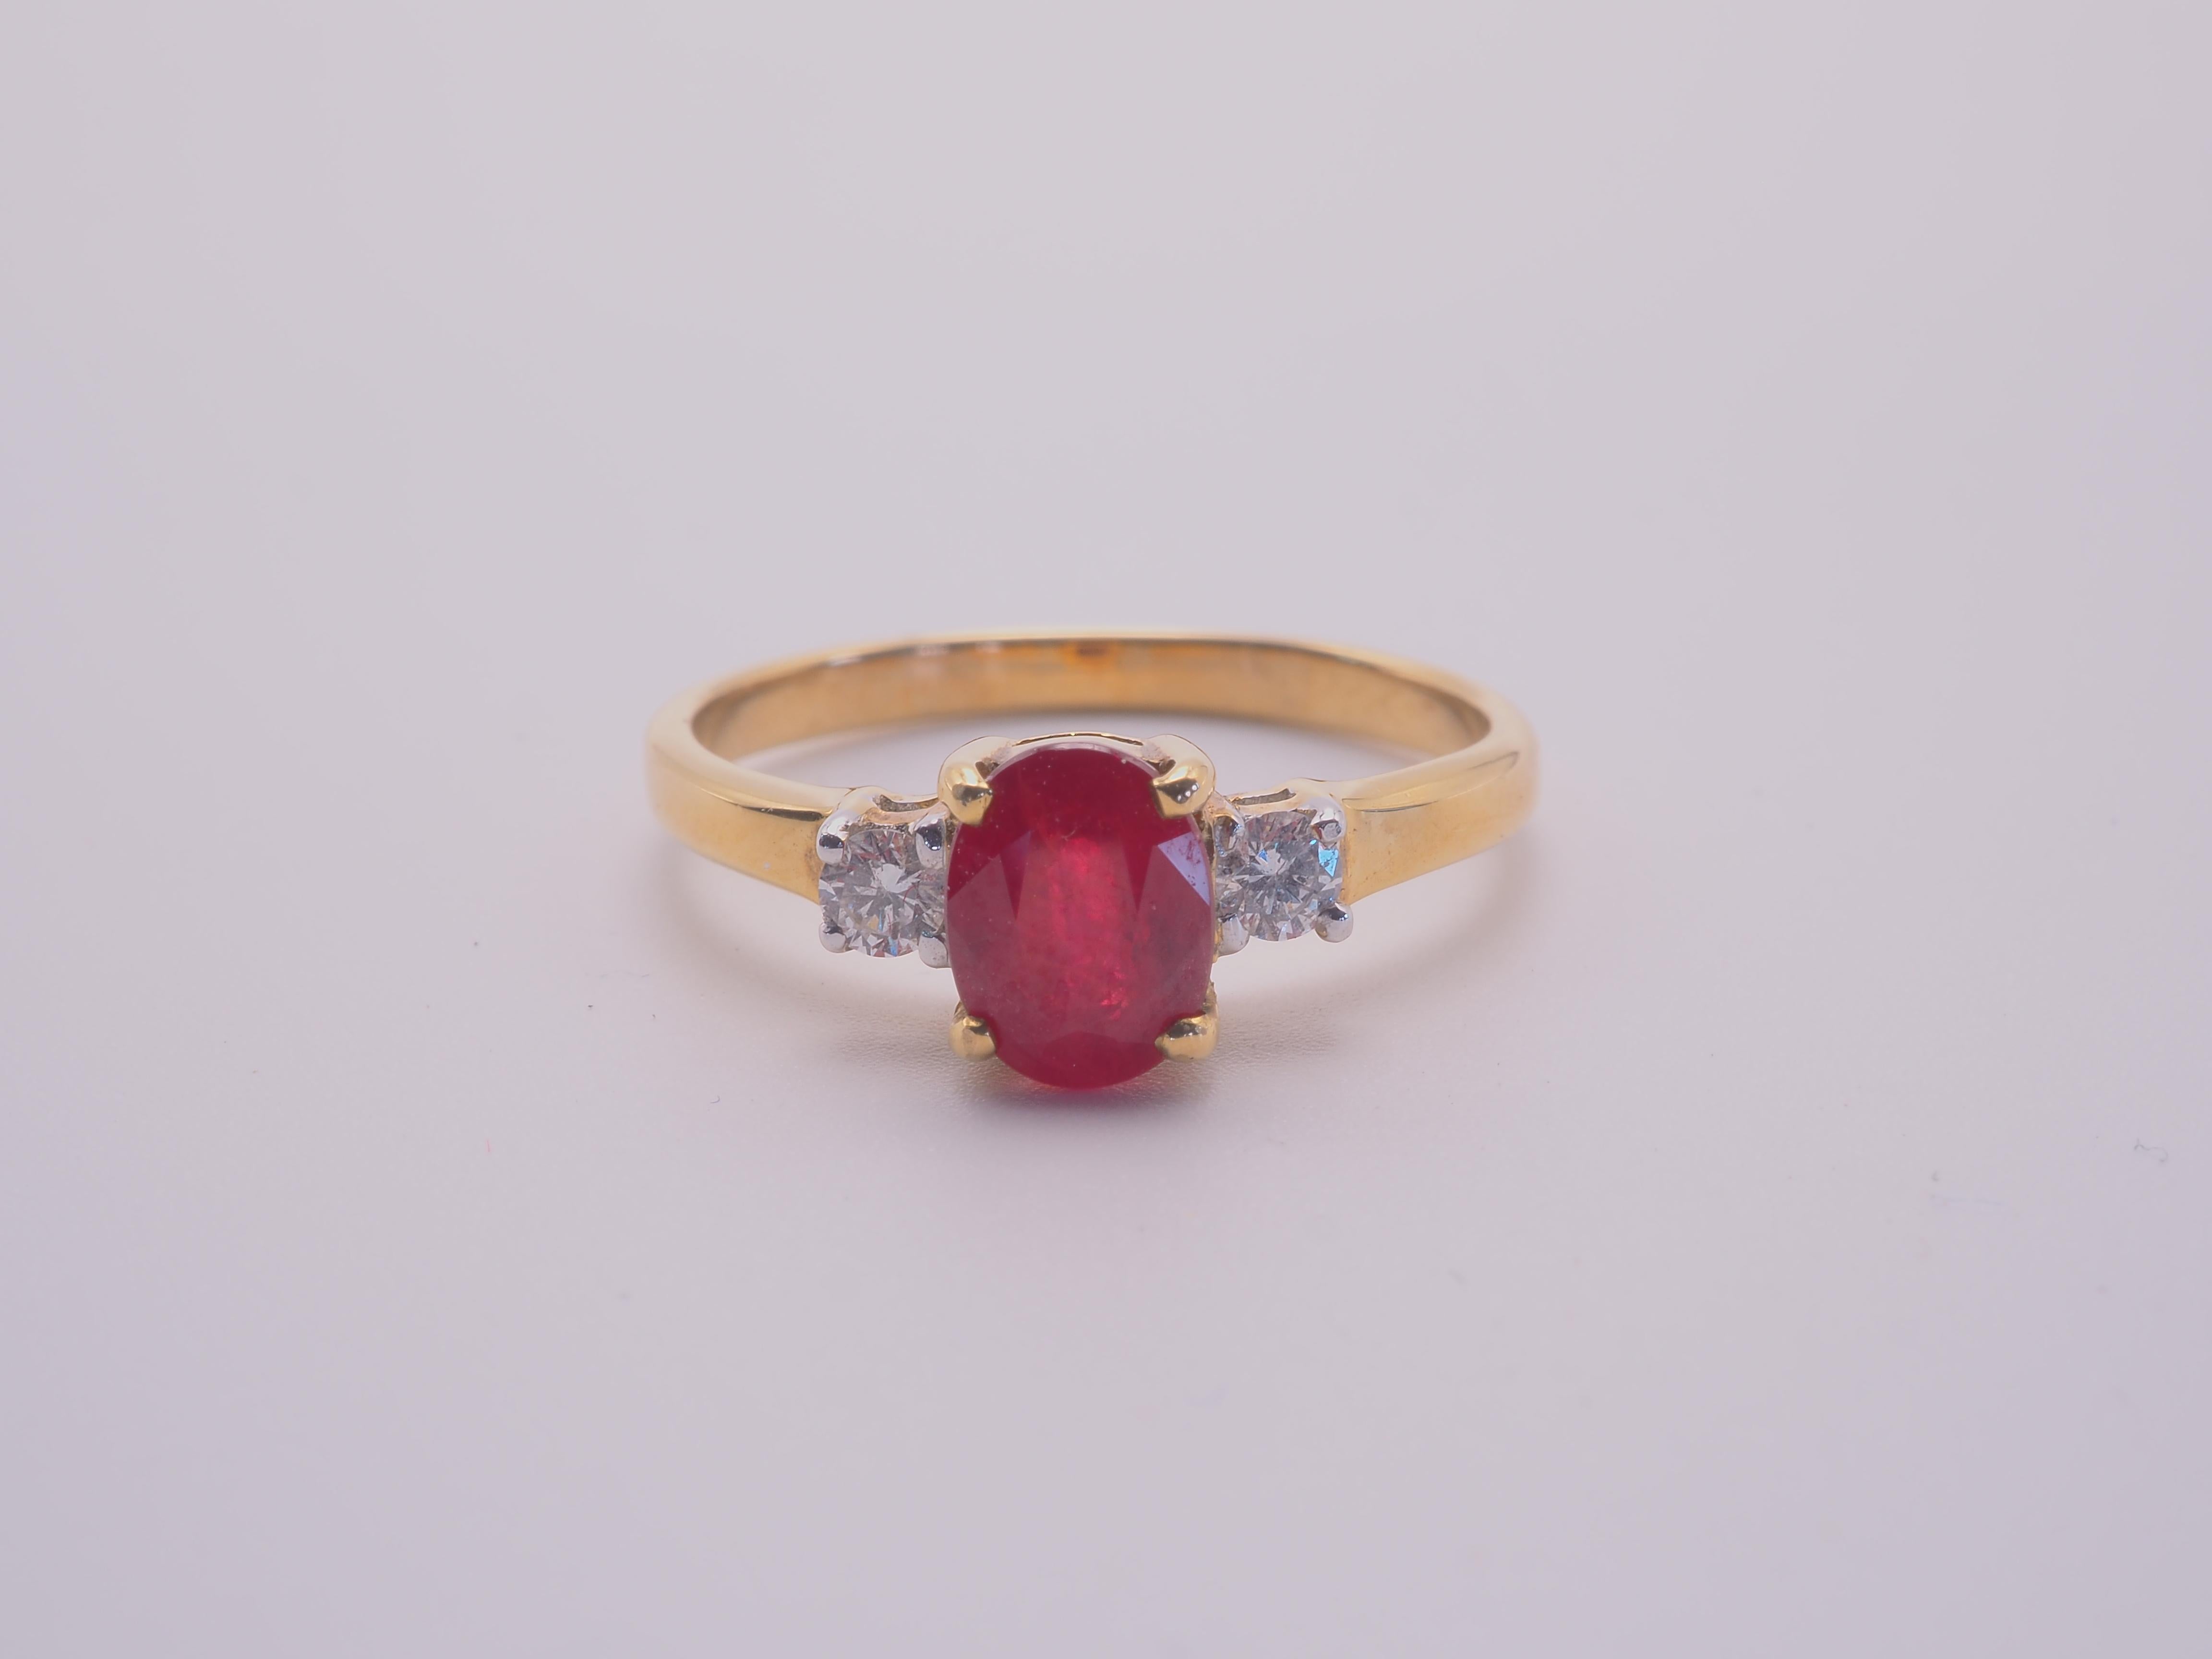 This amazing three-stone engagement ring boasts an oval cut ruby of 1.11 carats. The stunning oval cut ruby is set between 2 brilliant cut and decent size diamonds of good grade. Immaculate craftsmanship can be seen in all parts of the ring which is